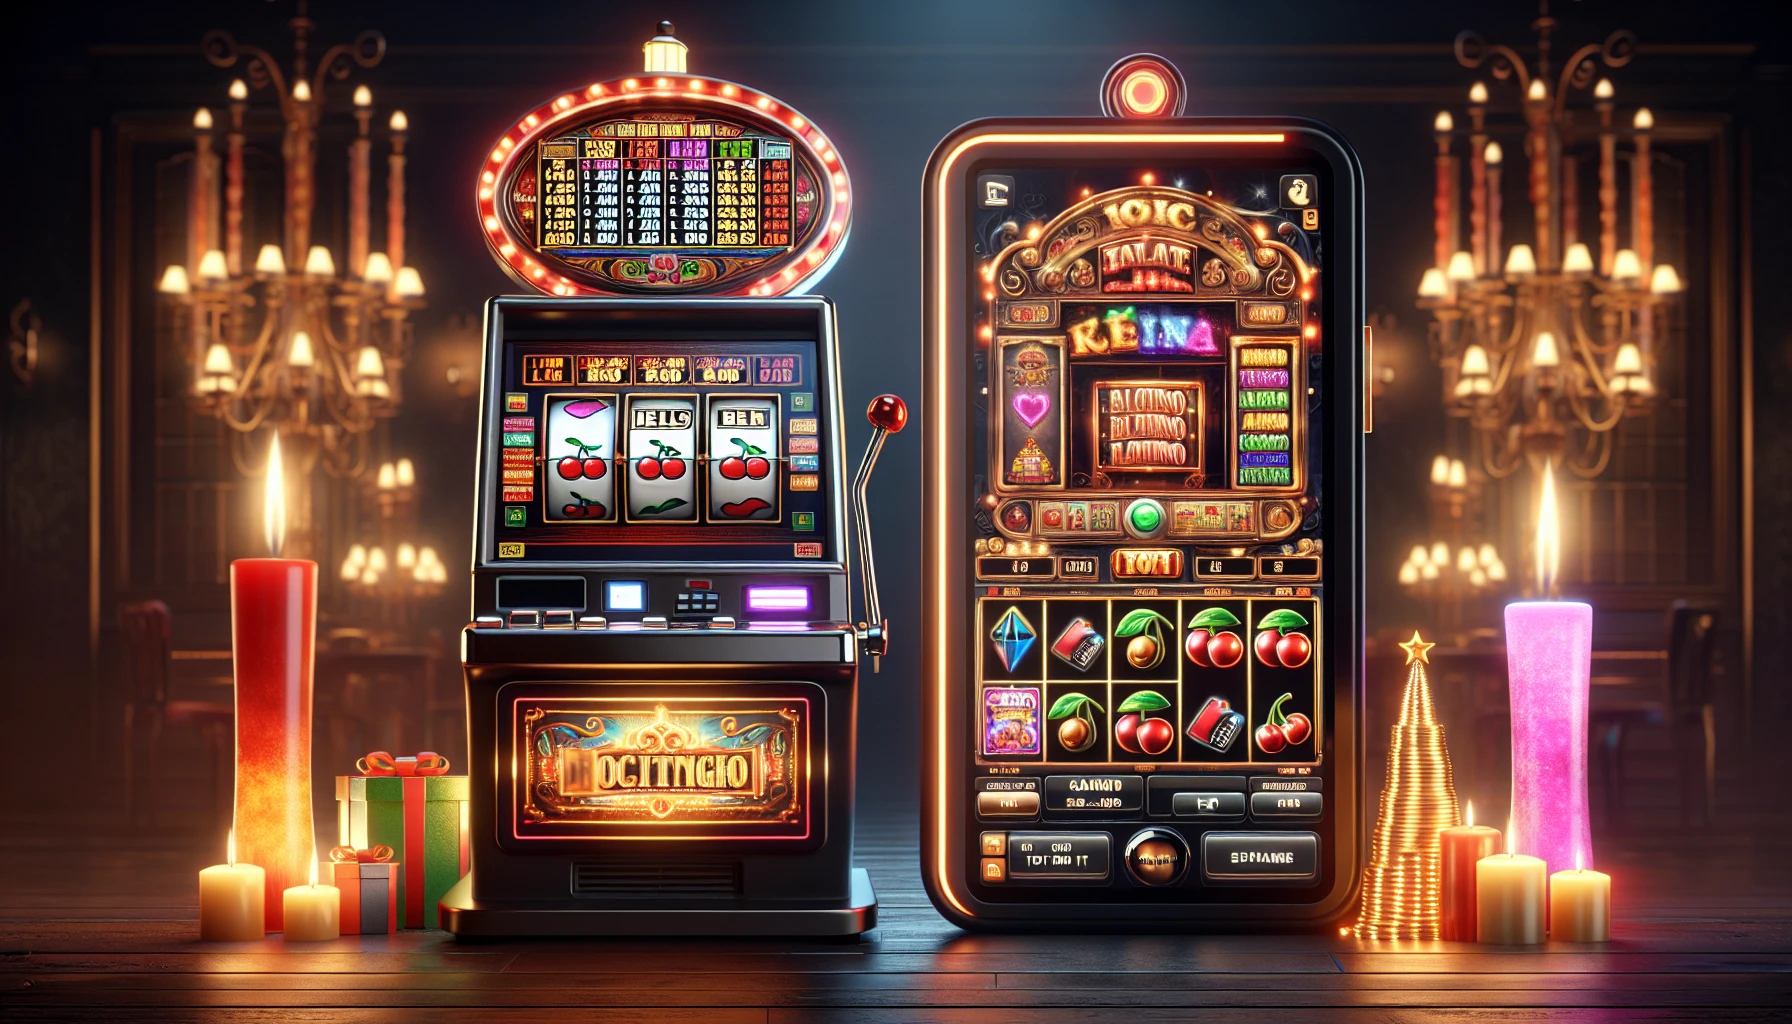 Comparison of classic slots and video slots